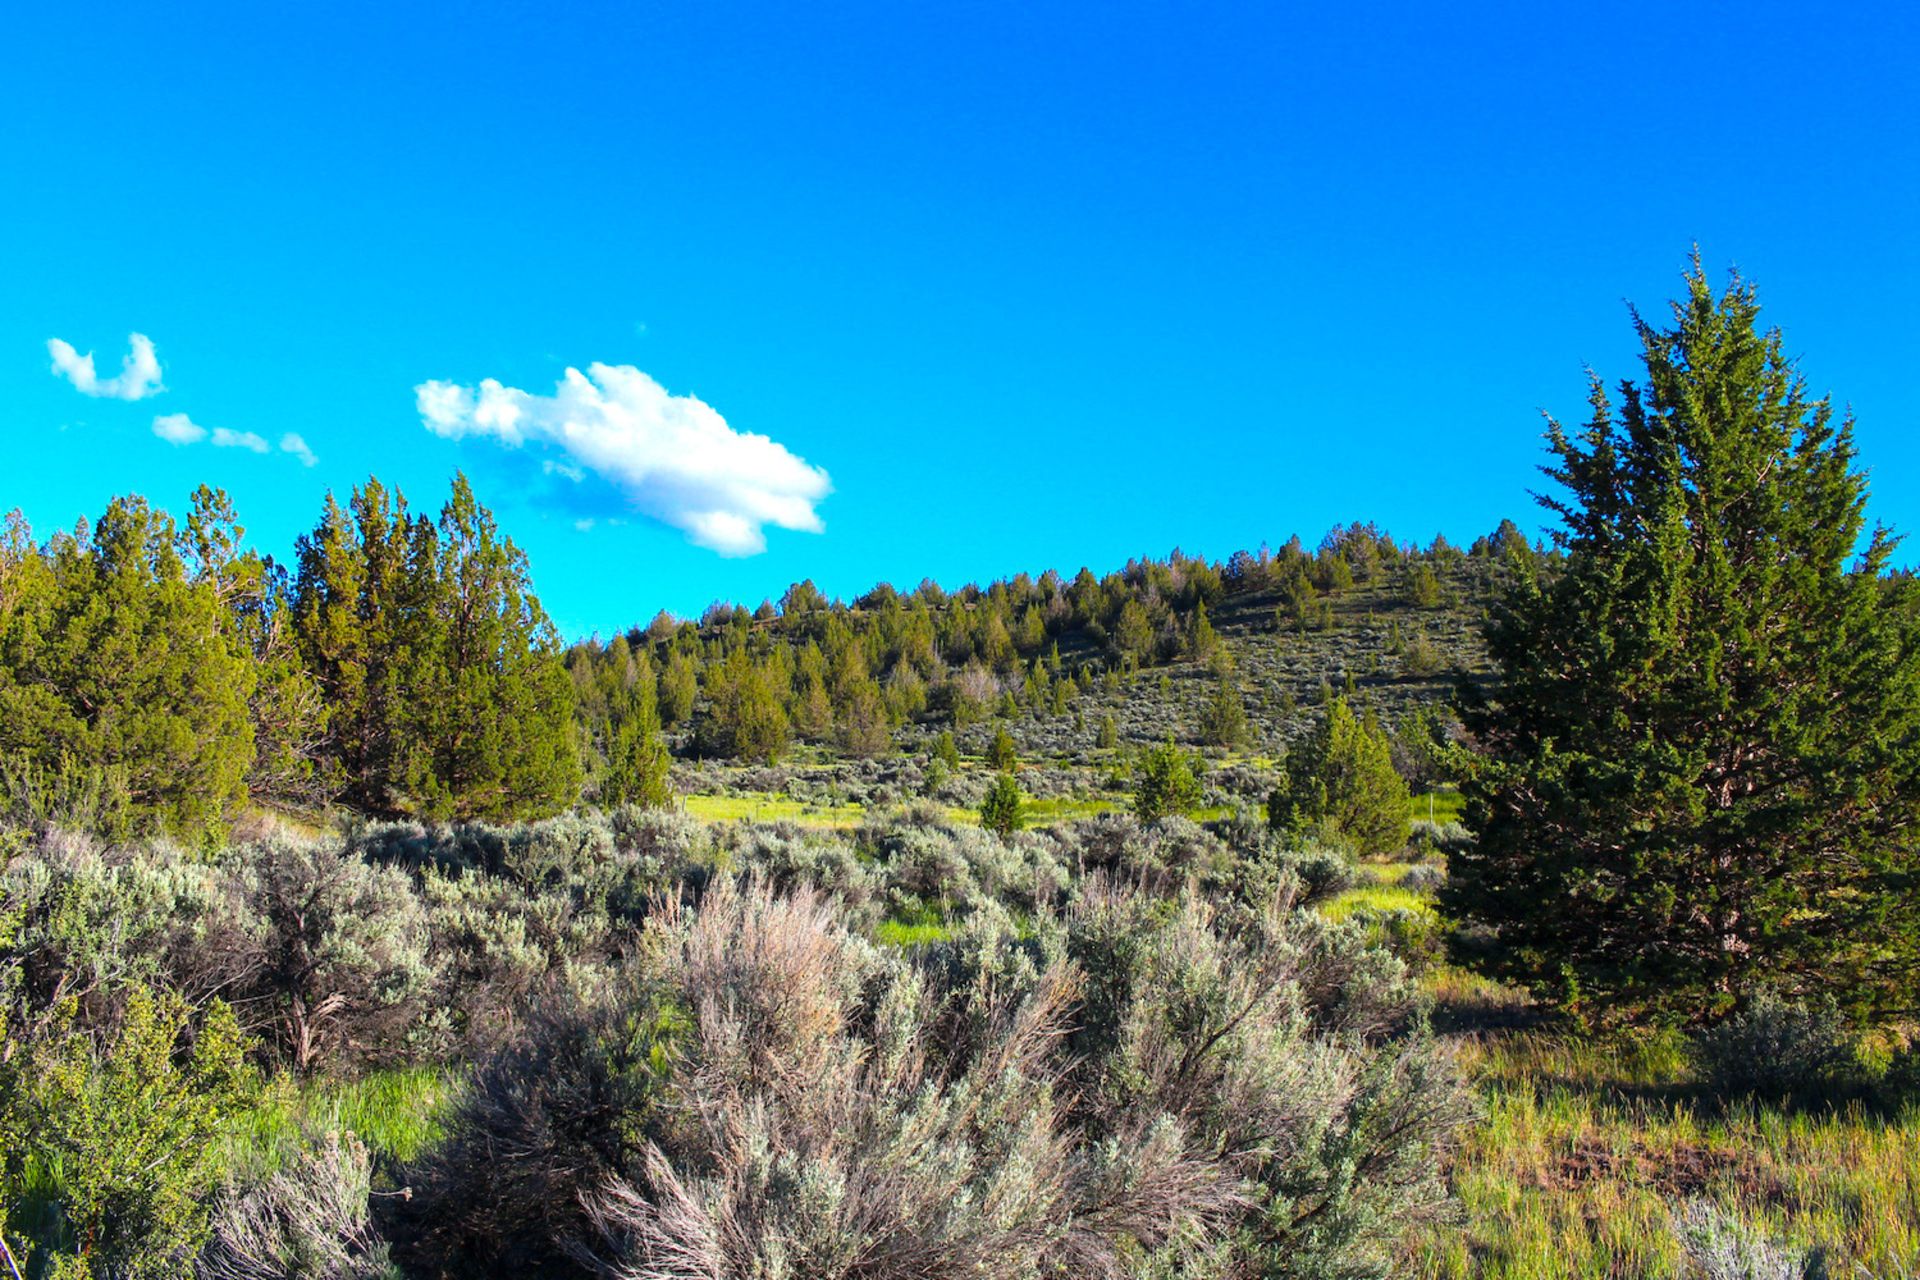 Explore the Wild Beauty of Modoc County: A Haven for Outdoor Enthusiasts! - Image 6 of 13